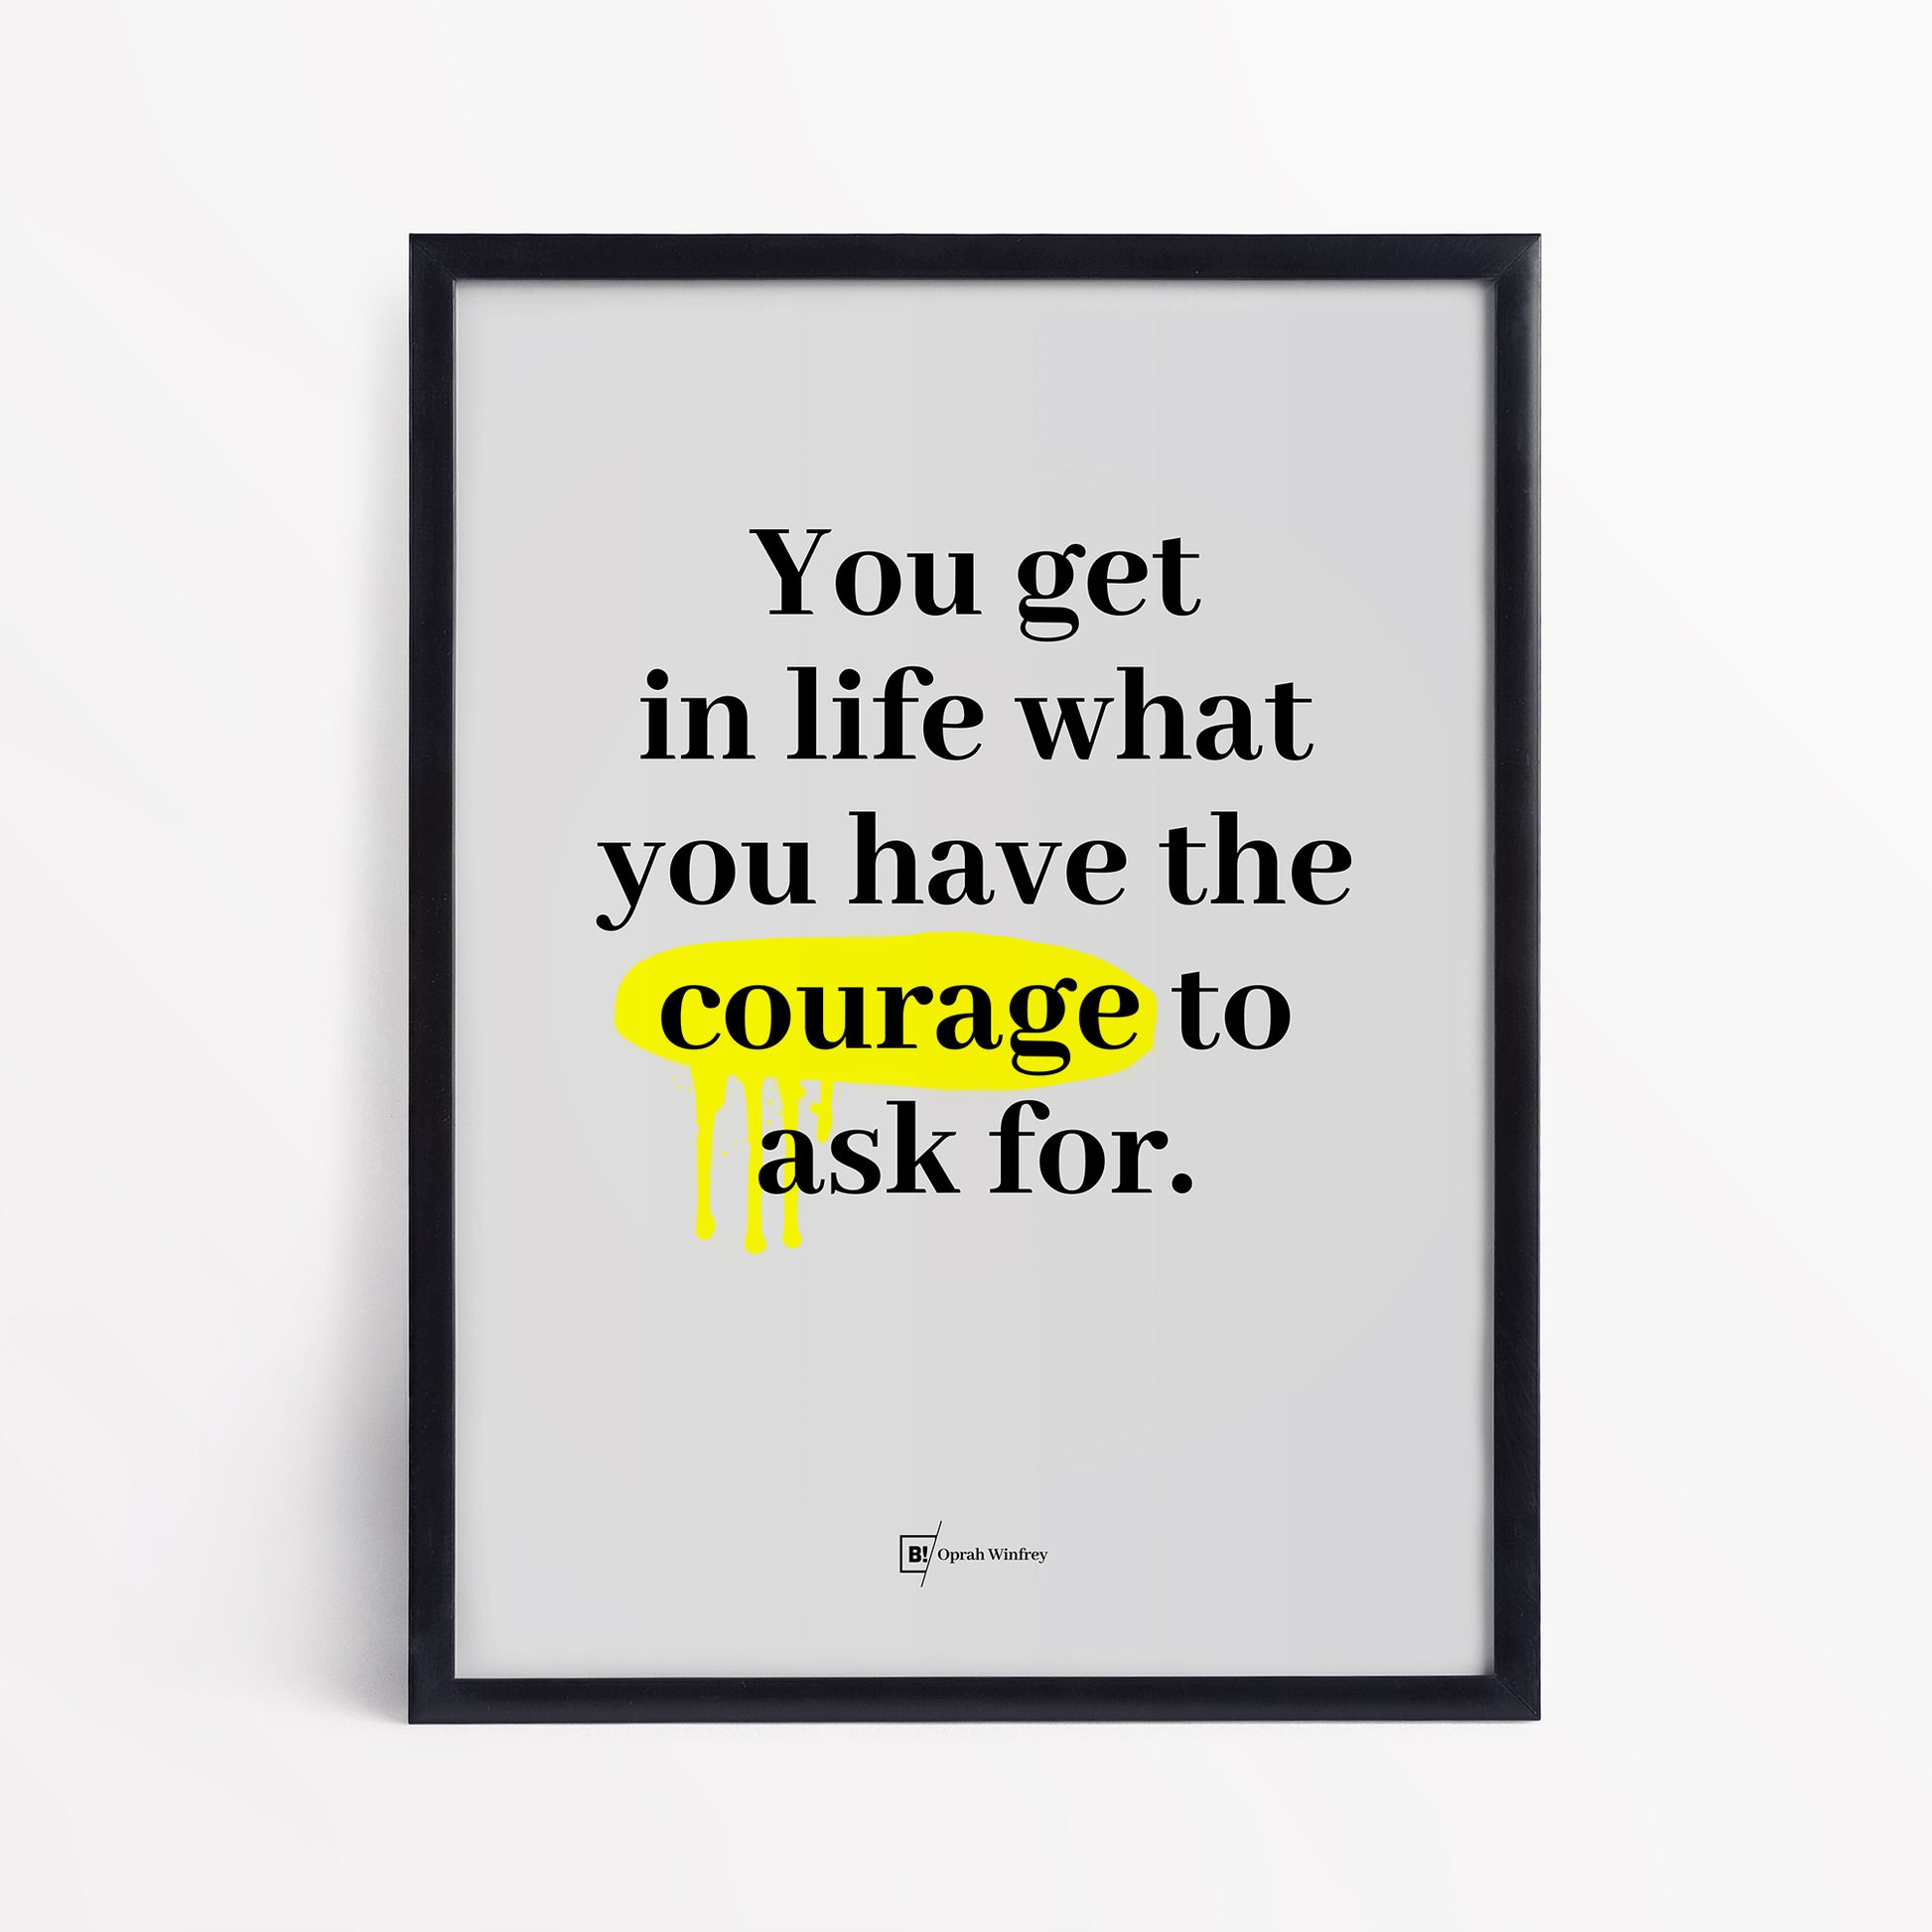 Be inspired by Oprah Winfrey's famous "You get in life what you have the courage to ask for" quote art print. This artwork was printed using the giclée process on archival acid-free paper and is presented in a simple black frame that captures its timeless beauty in every detail.